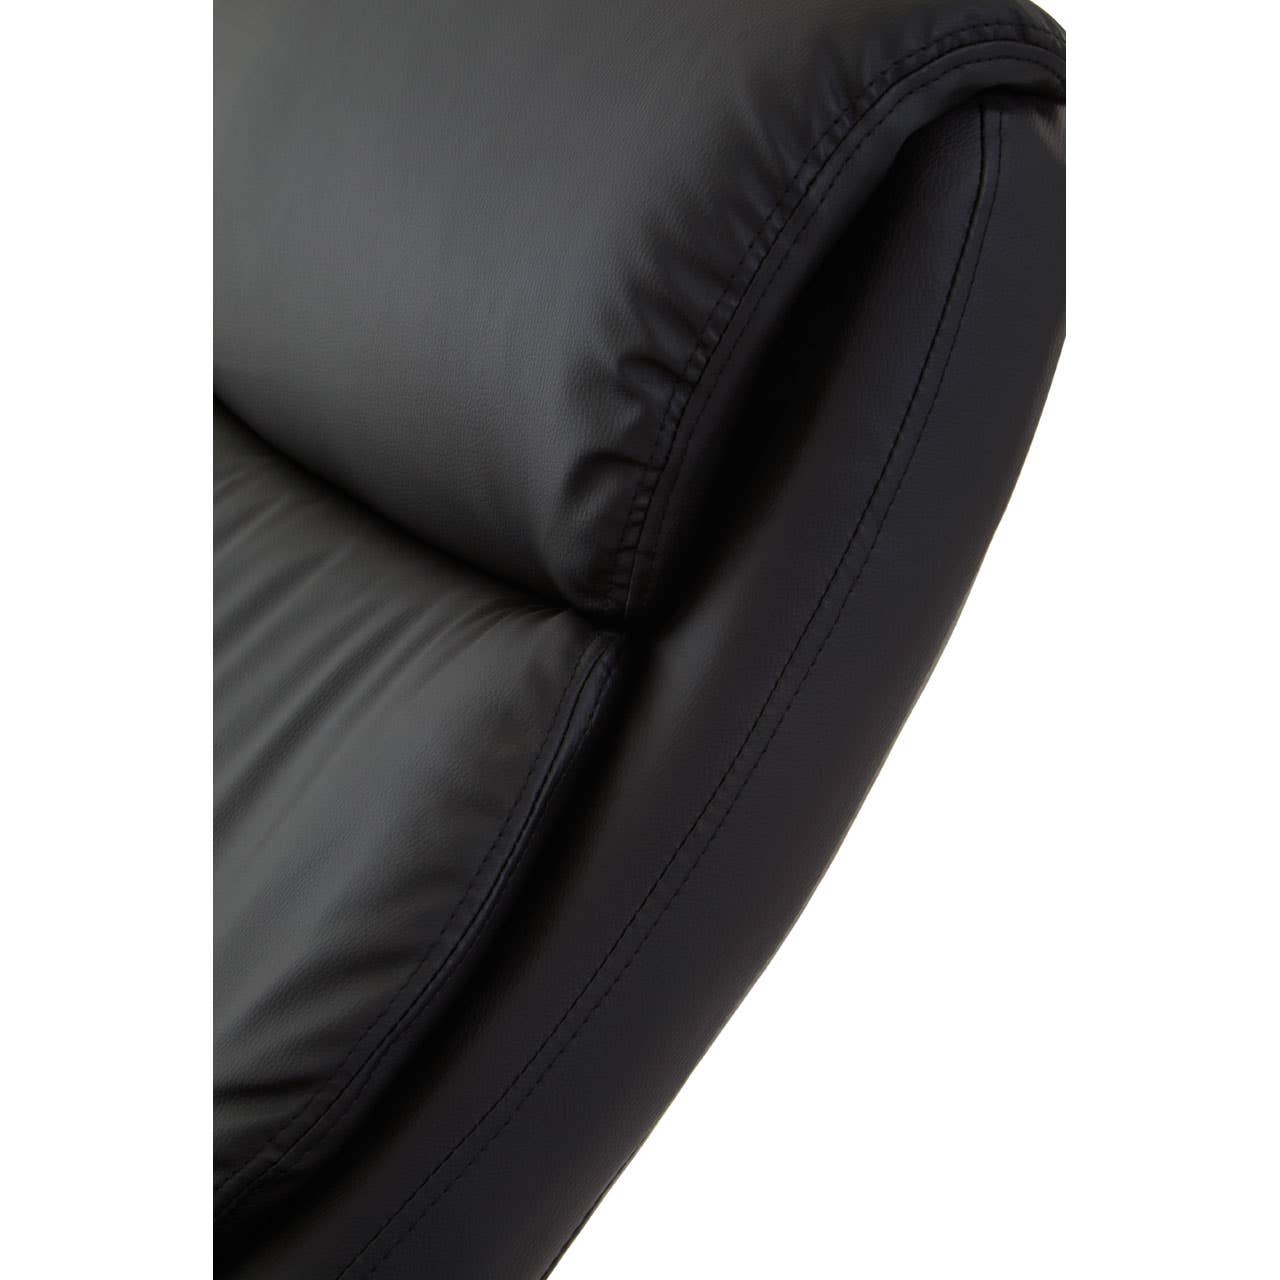 Noosa & Co. Living Denton Black Leather Effect Chair And Footstool House of Isabella UK